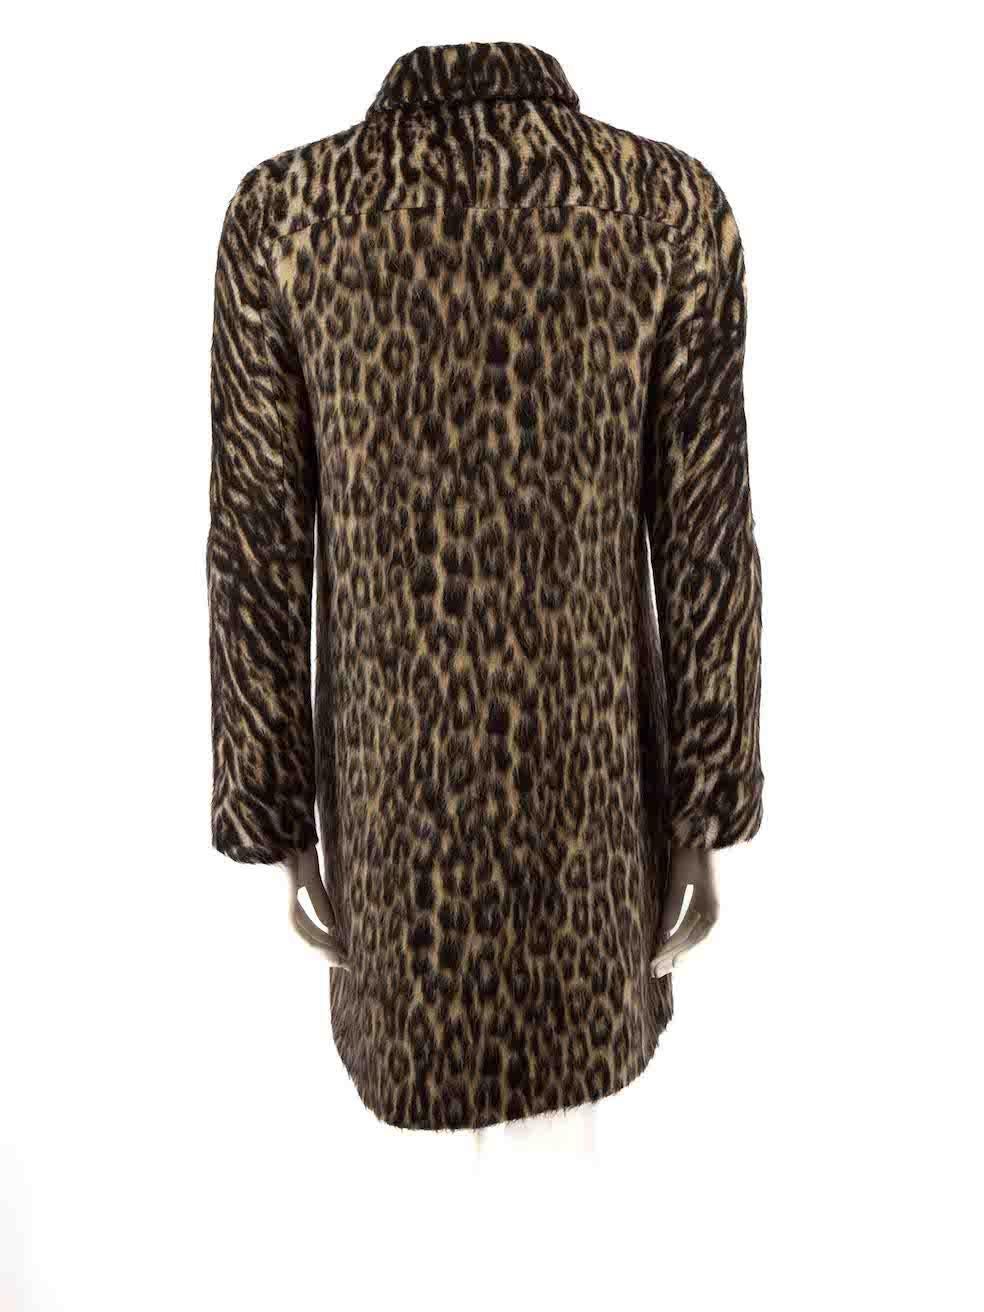 Giambattista Valli Brown Wool Brushed Leopard Print Coat Size XXS In Good Condition For Sale In London, GB